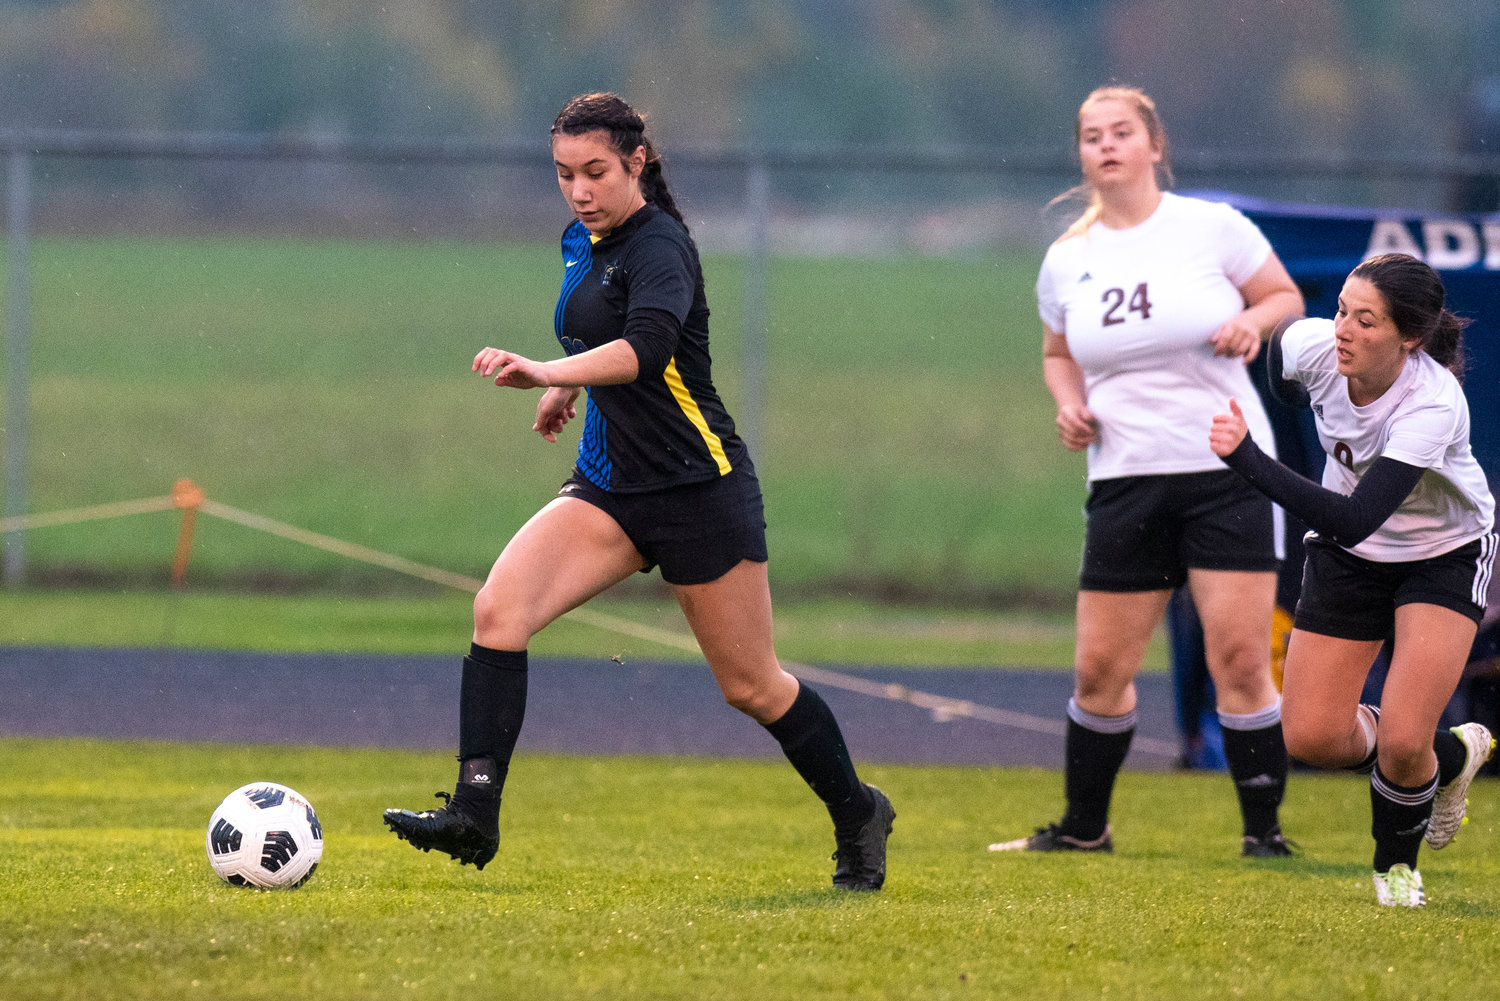 Adna's Zarine Walker (16) gains possession against two Raymond-South Bend players during a match on Oct. 13, 2021.